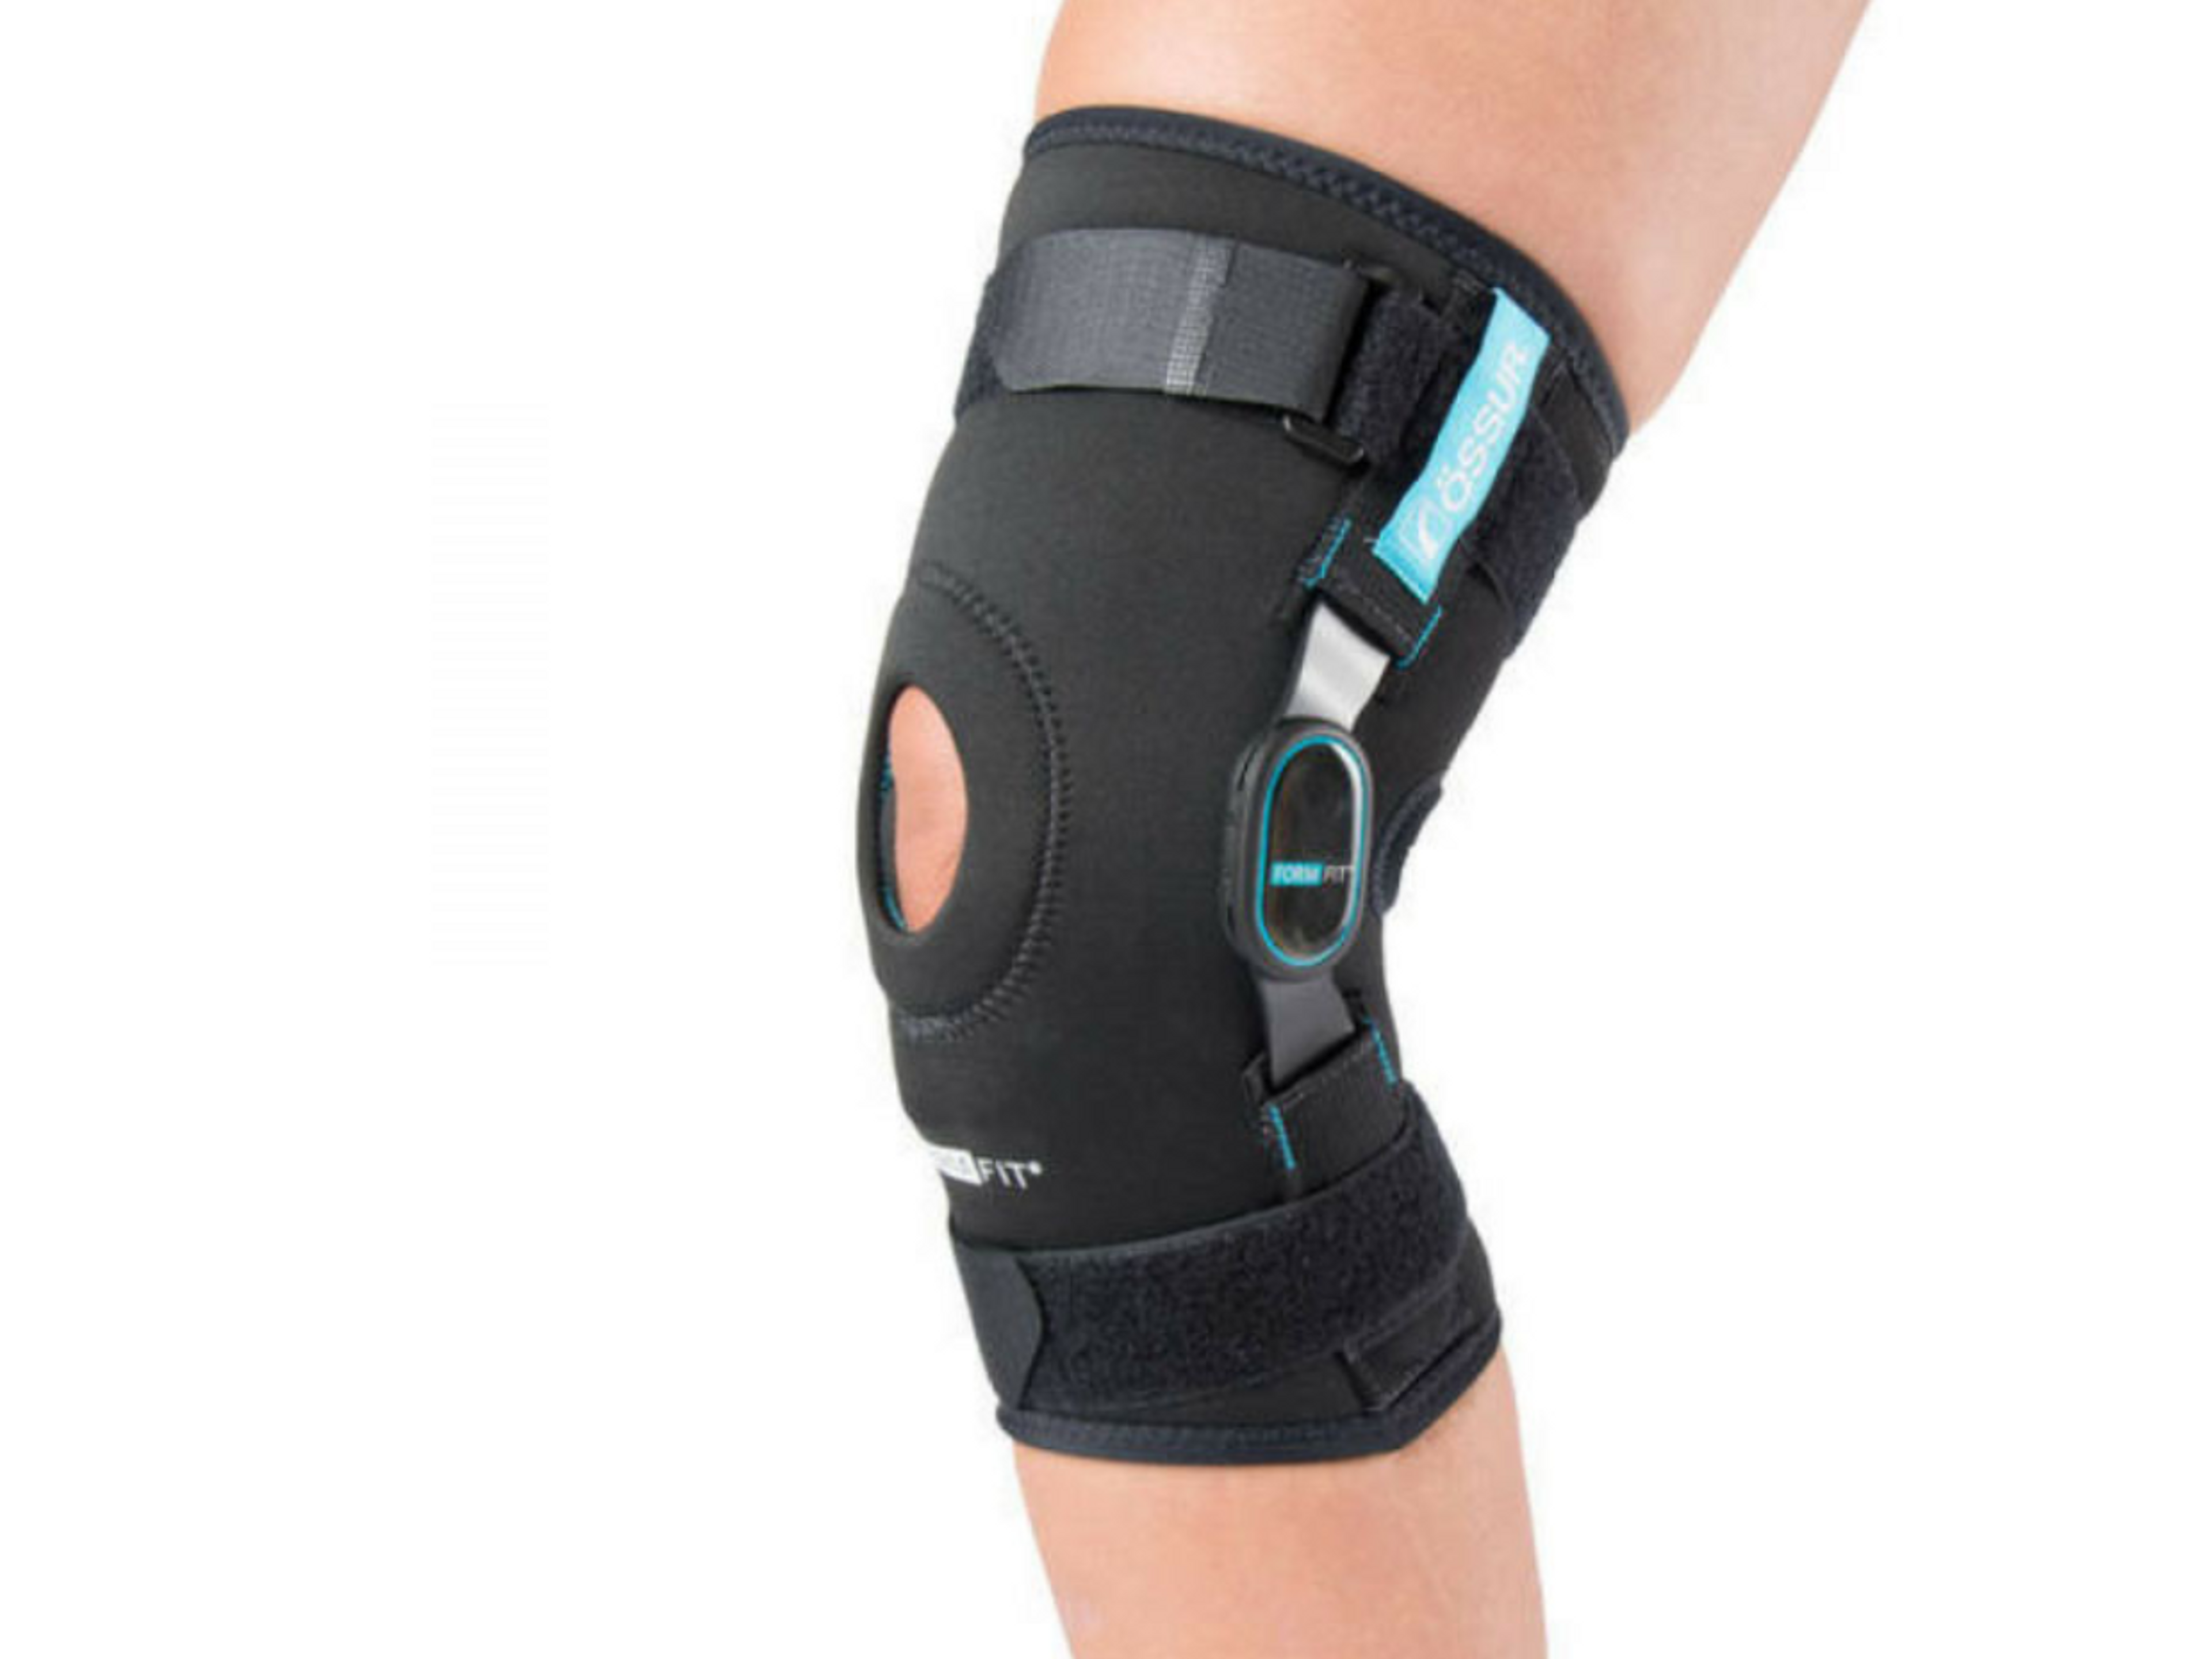 Soft hinged knee braces are used for all levels of meniscus tears but if you have a ligament injury, a rigid one is better.